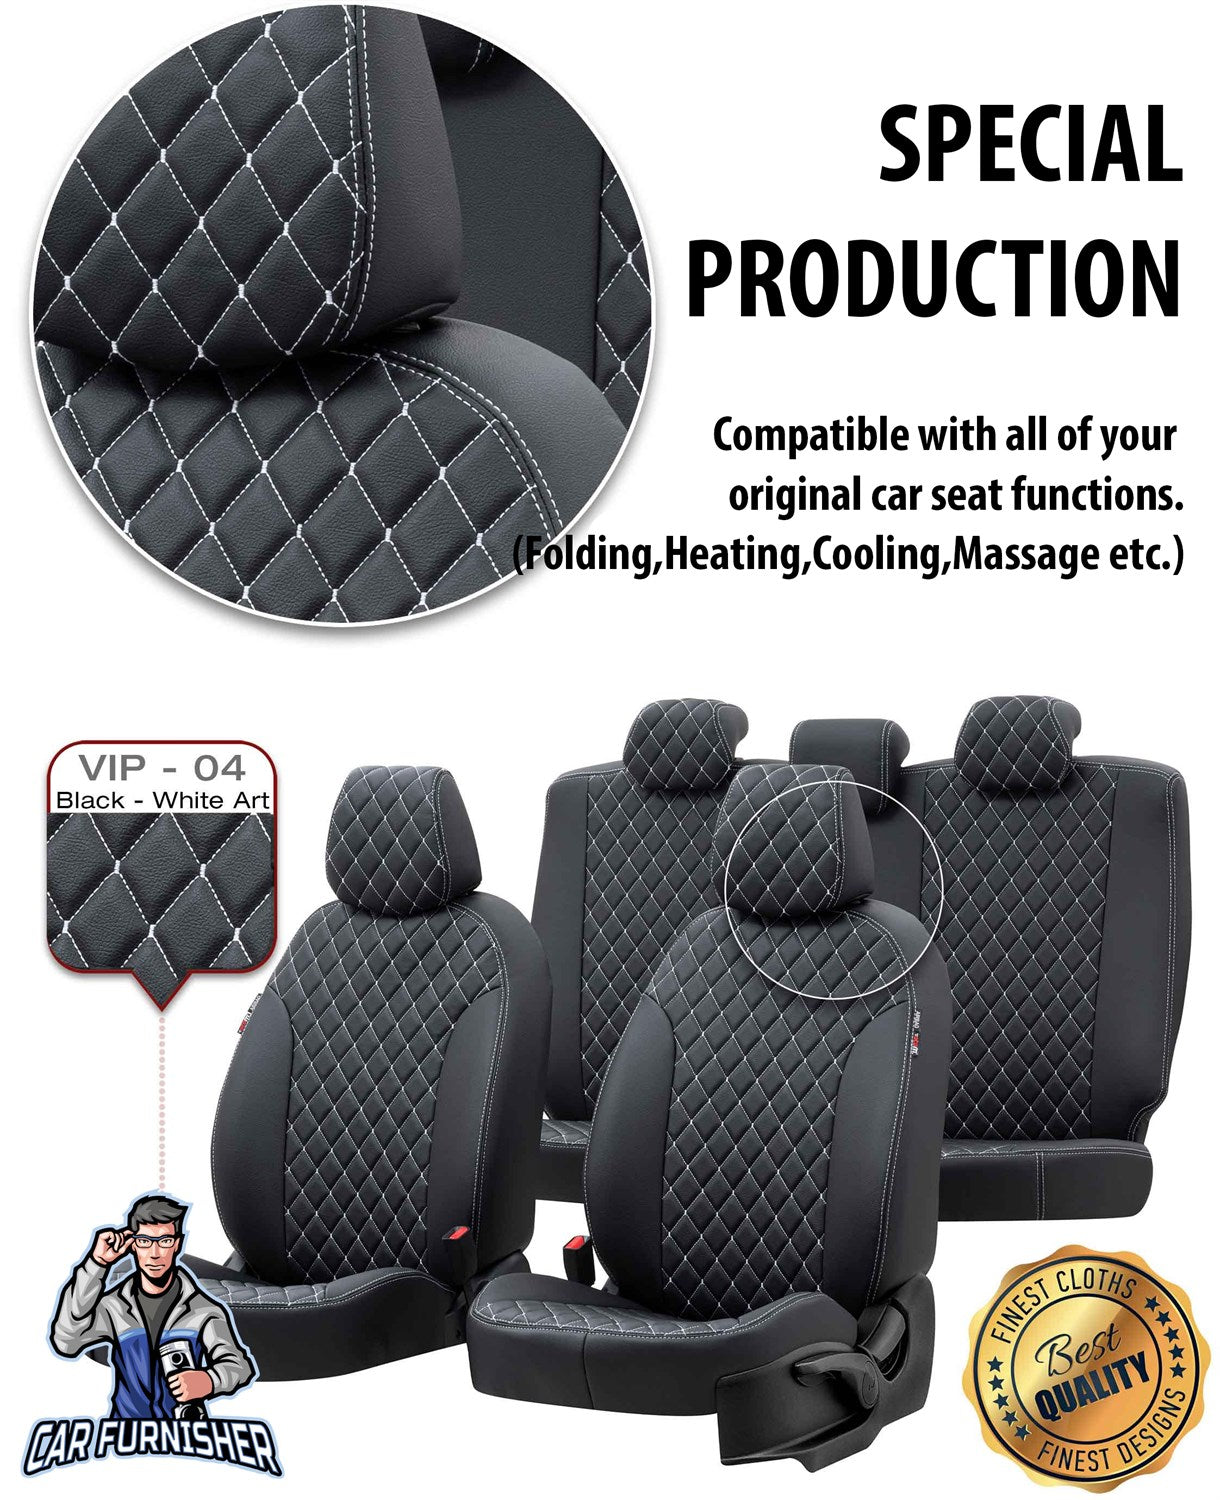 Audi Q7 Seat Cover Madrid Leather Design Smoked Leather